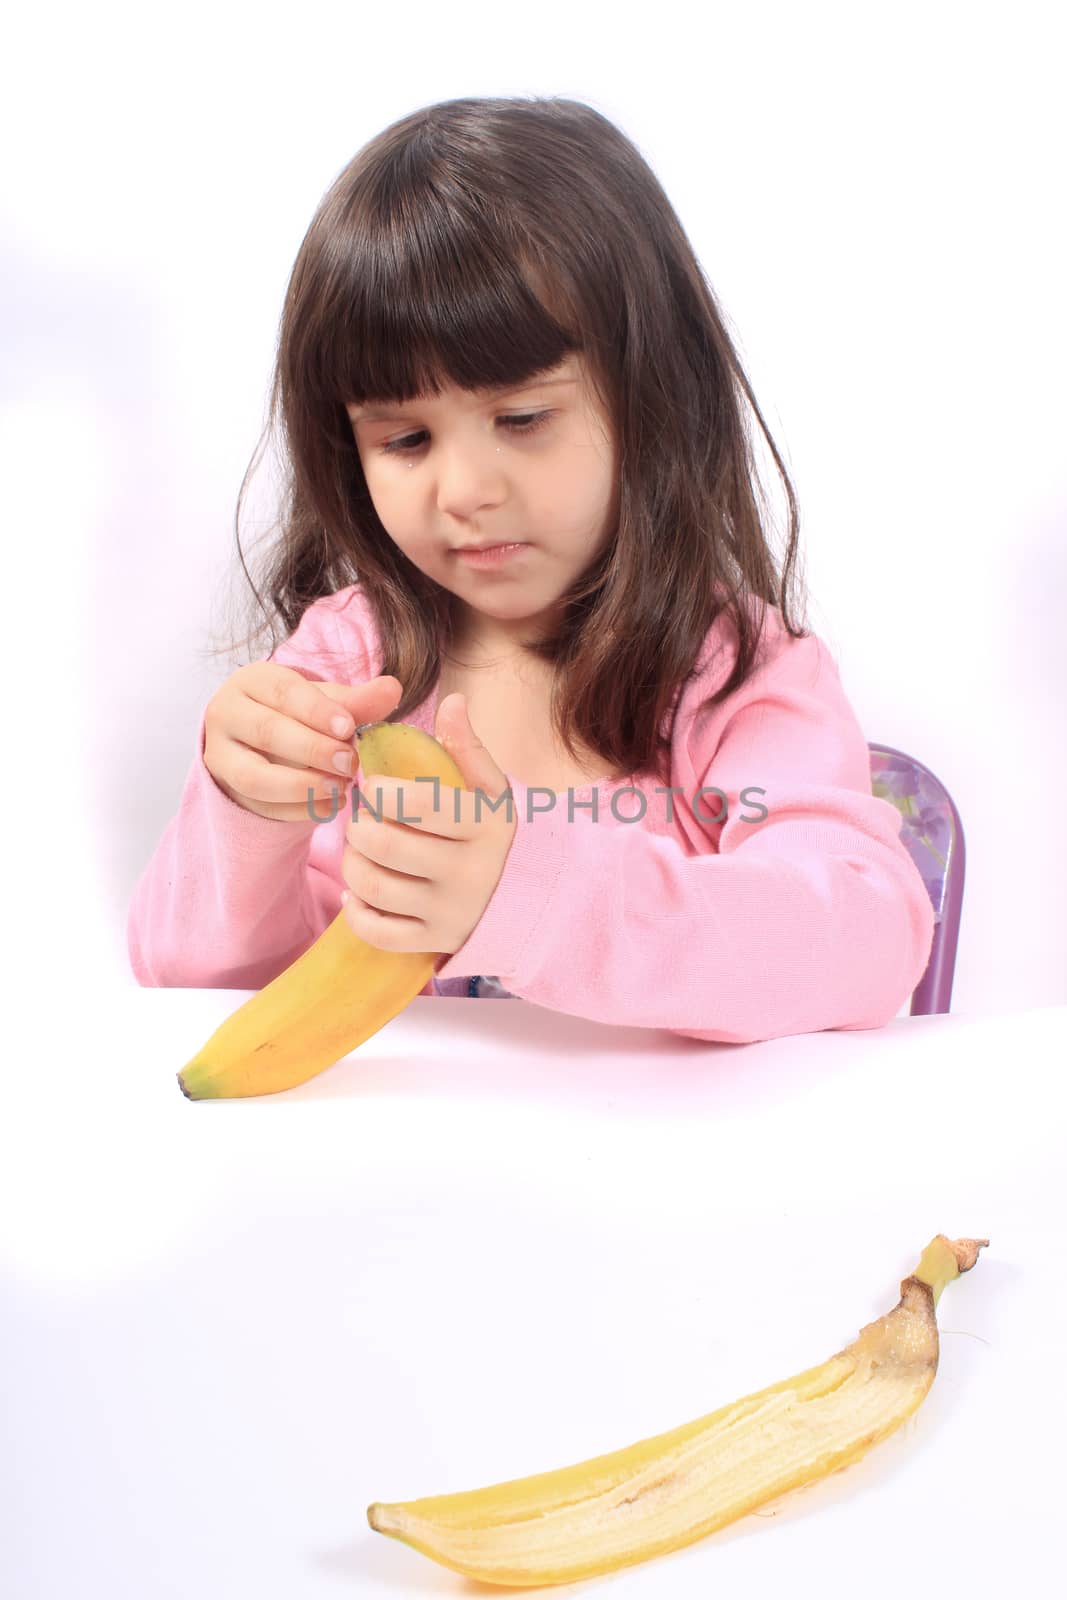 Young little girl pealing a healthy banana